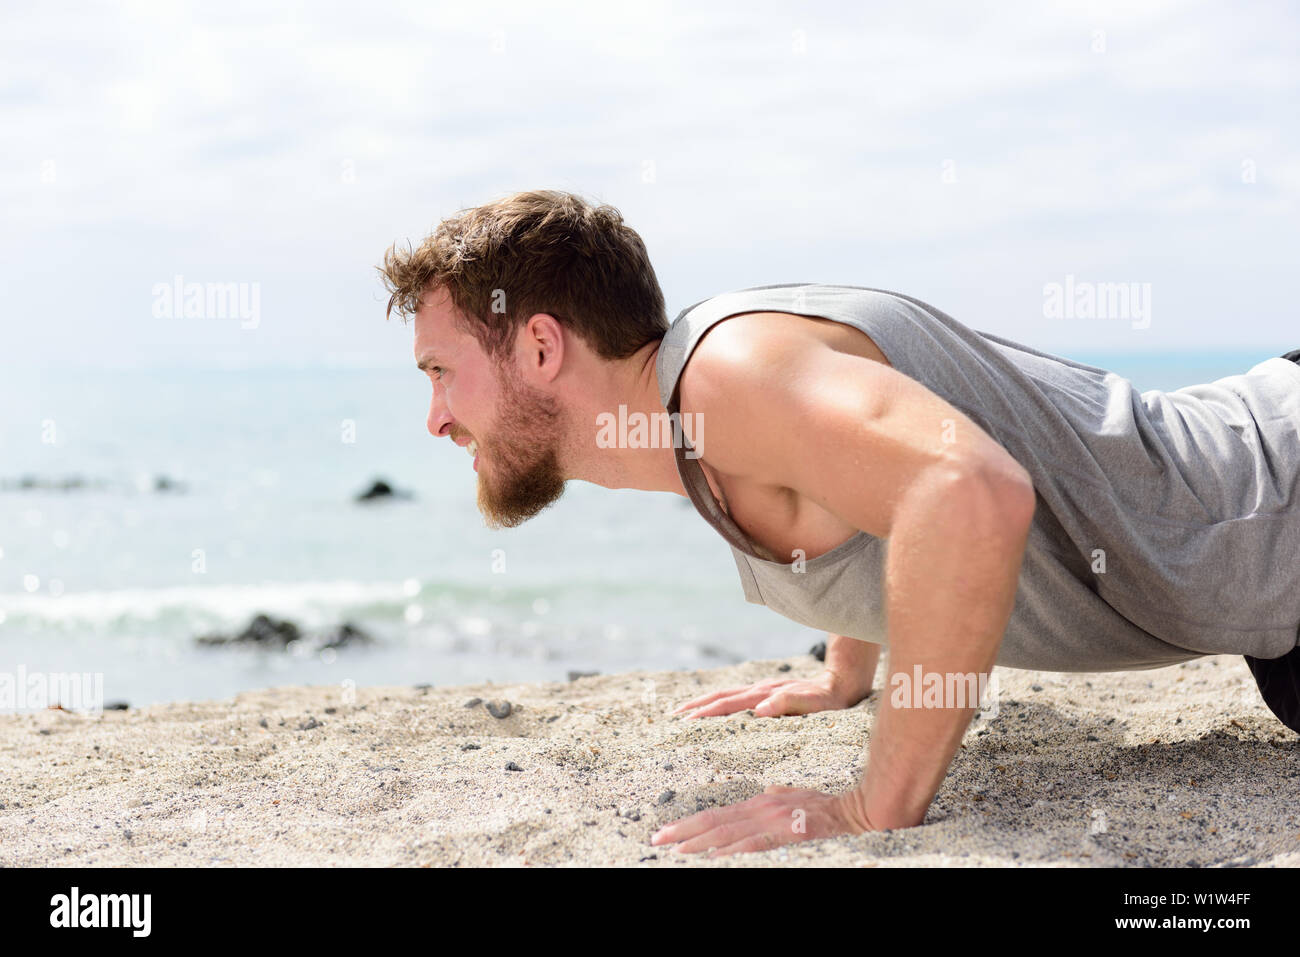 Fitness man doing push-up exercise on beach. Portrait of fit guy ...